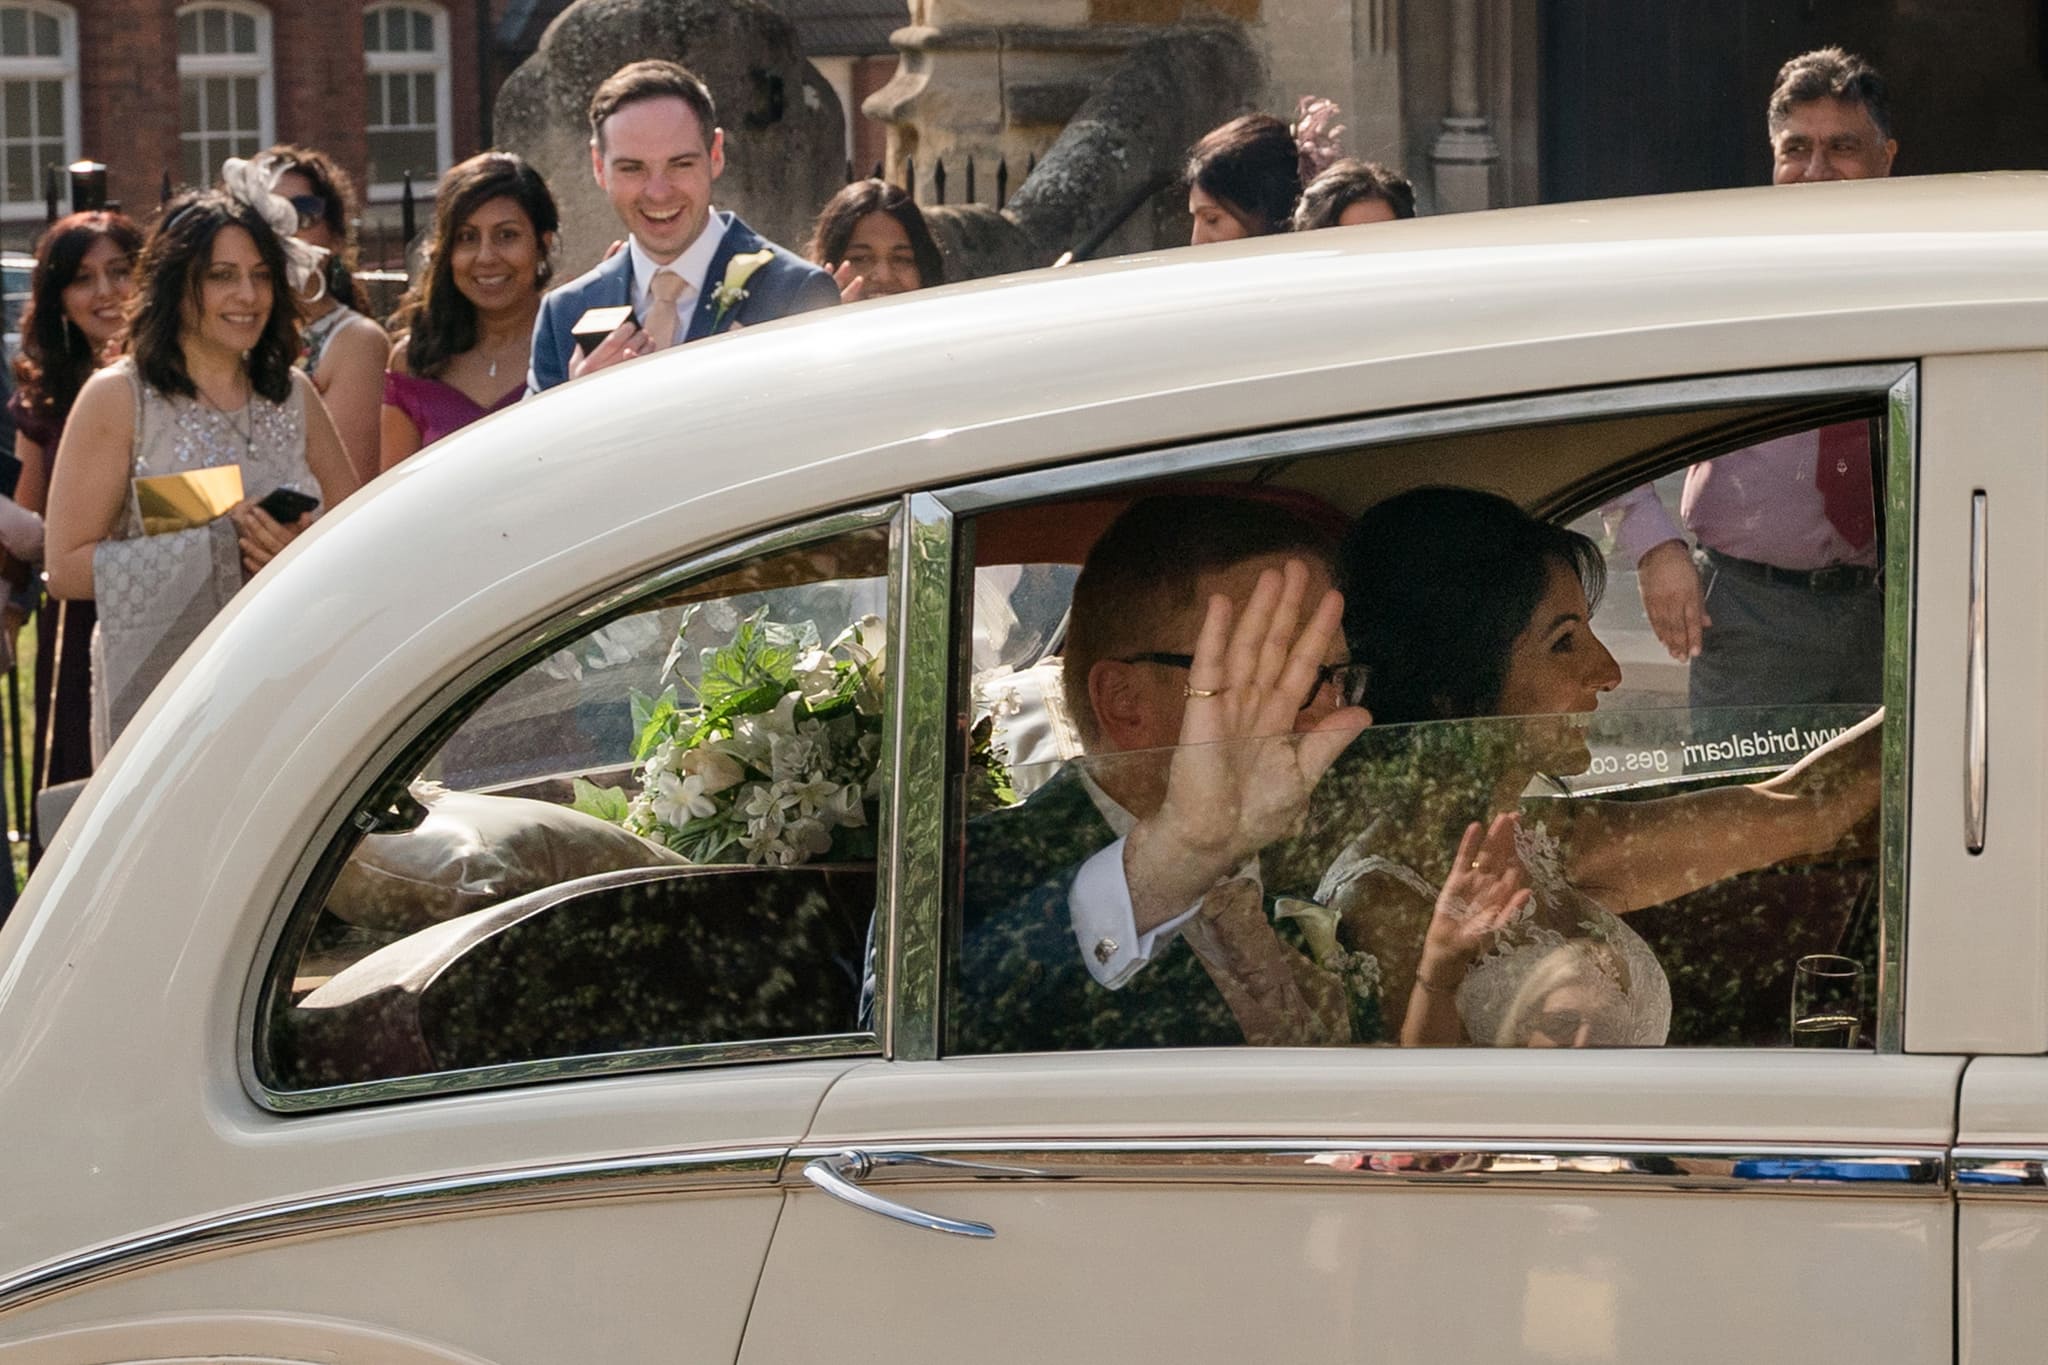 Groom waving out of the car window with his hand naturally obscuring his face